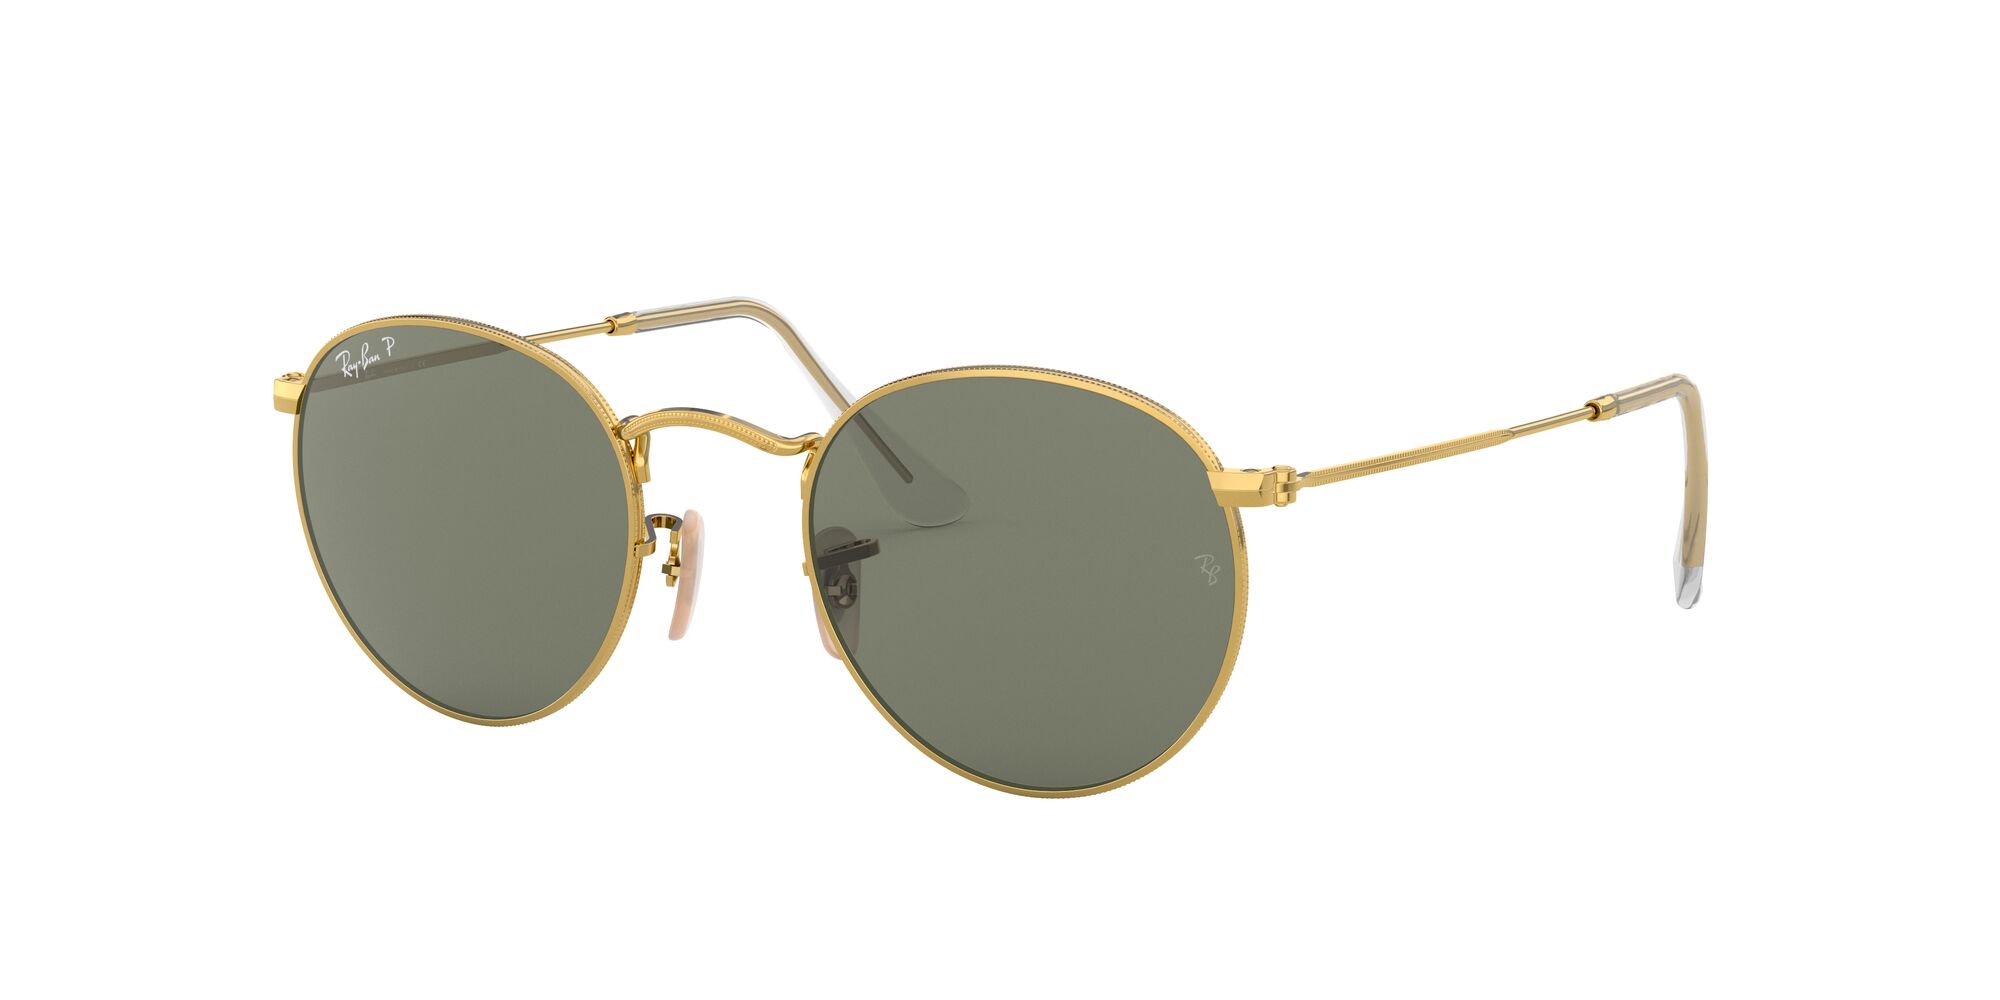 Ray-Ban RB3447 Round Metal Sunglasses - image 2 of 12